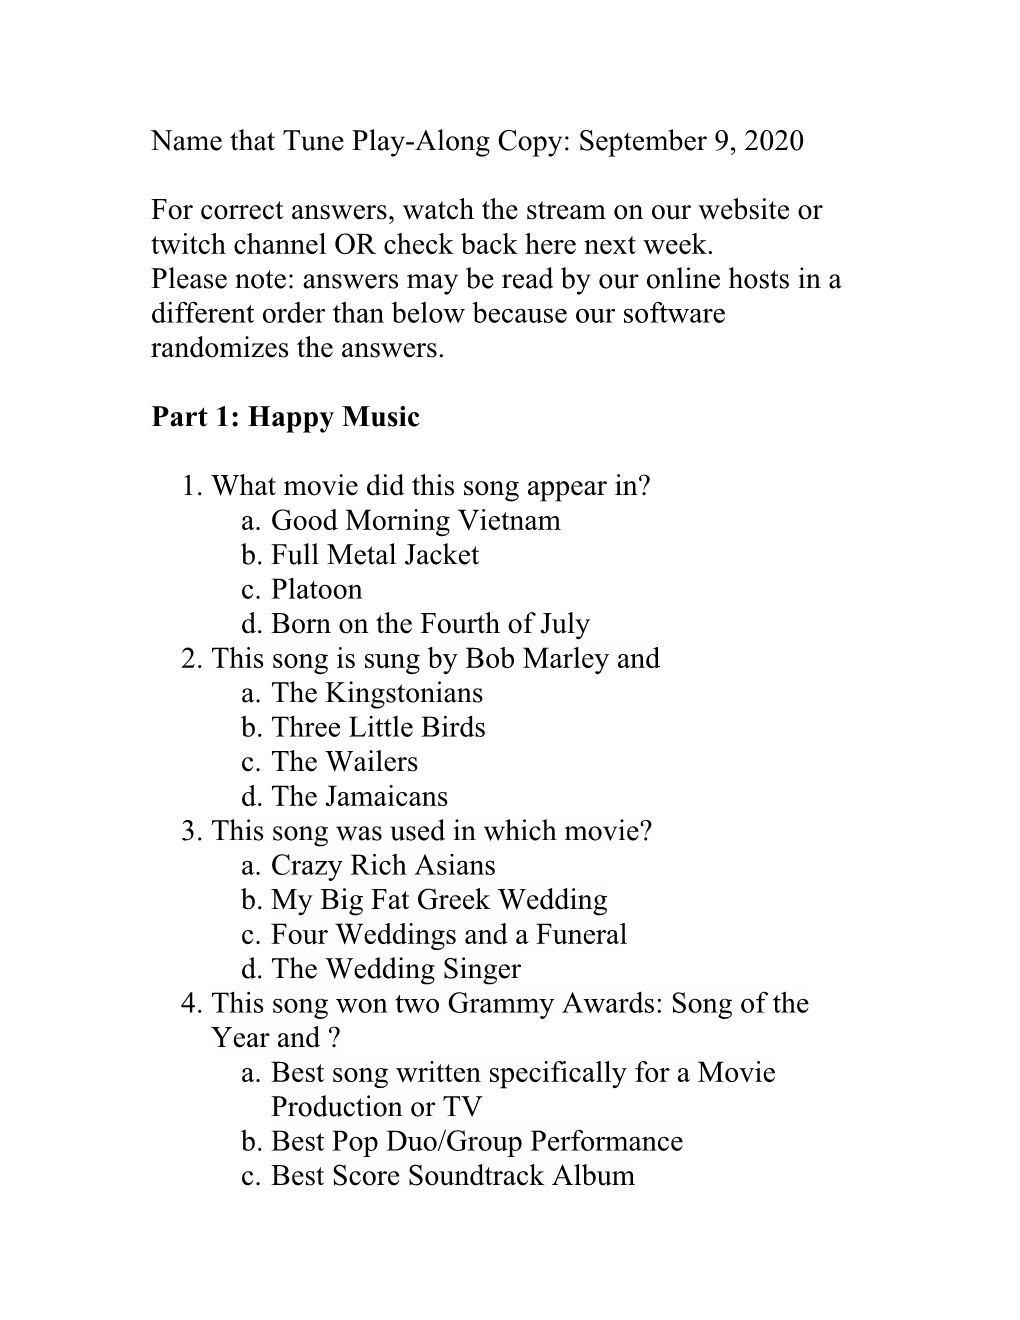 Name That Tune Play-Along Copy: September 9, 2020 for Correct Answers, Watch the Stream on Our Website Or Twitch Channel OR Chec